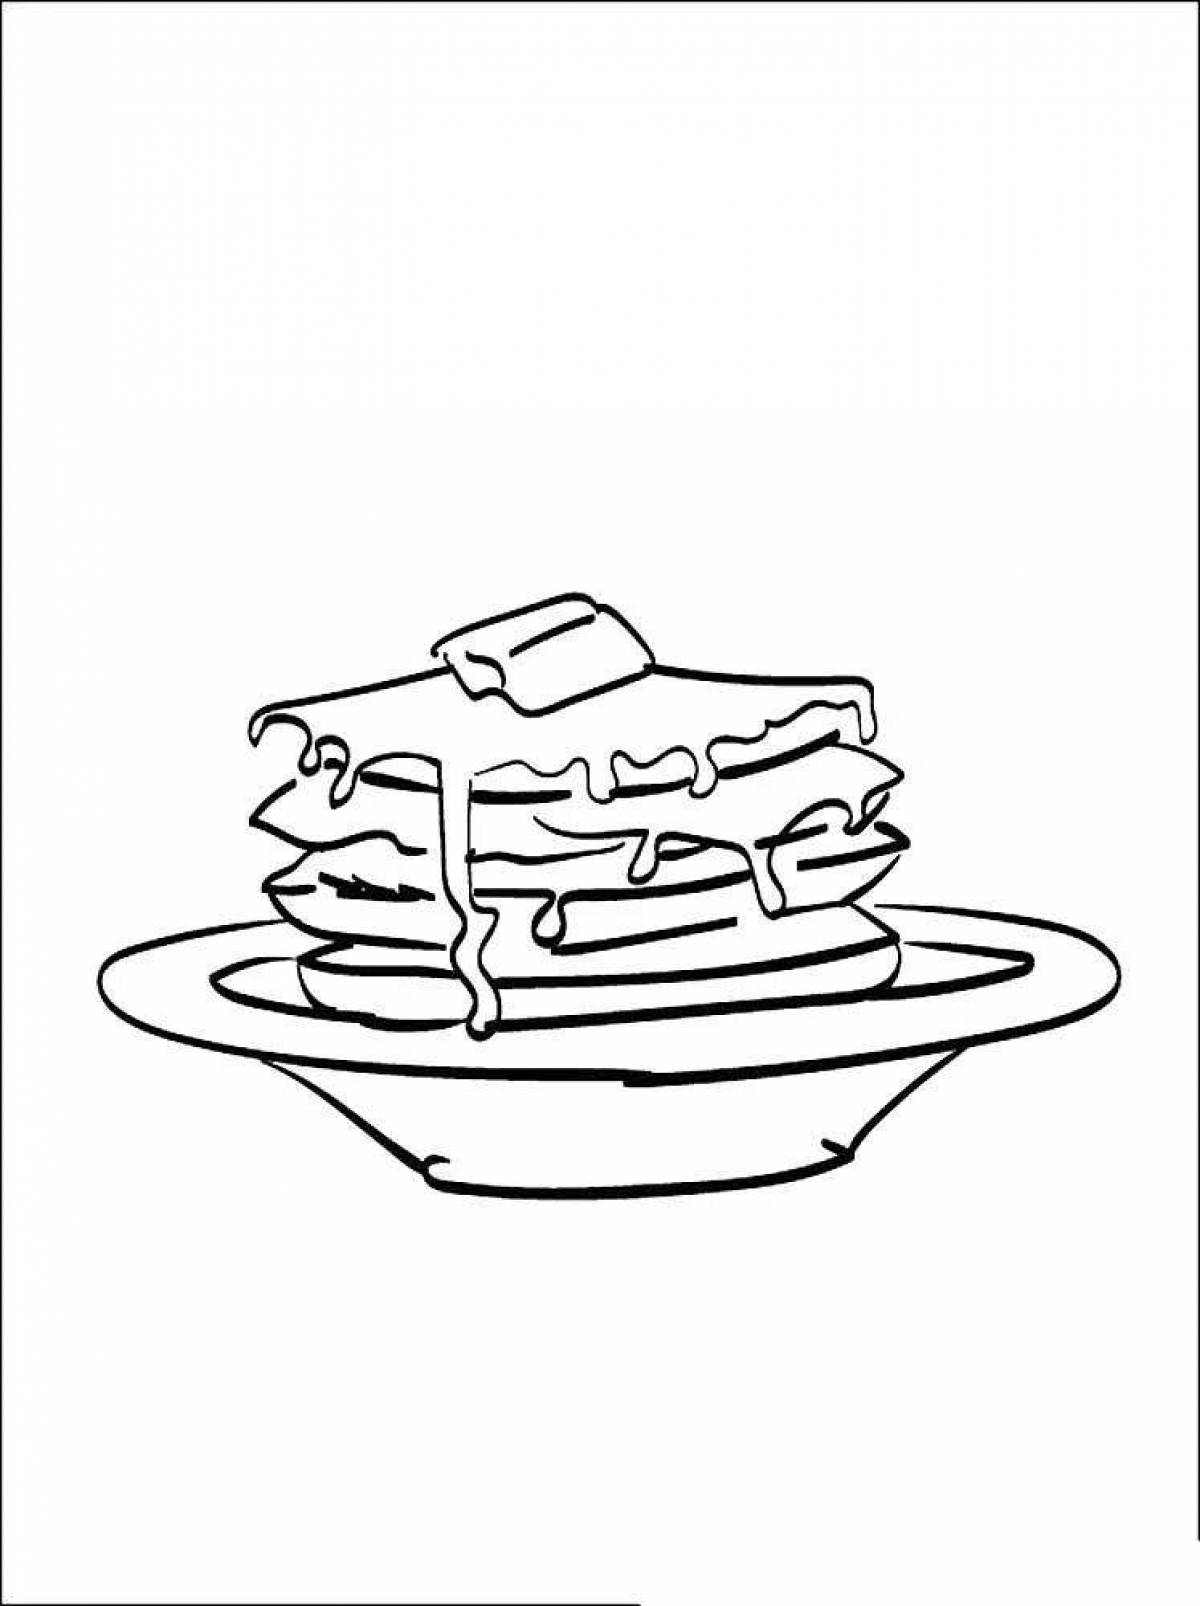 Adorable pancakes coloring page